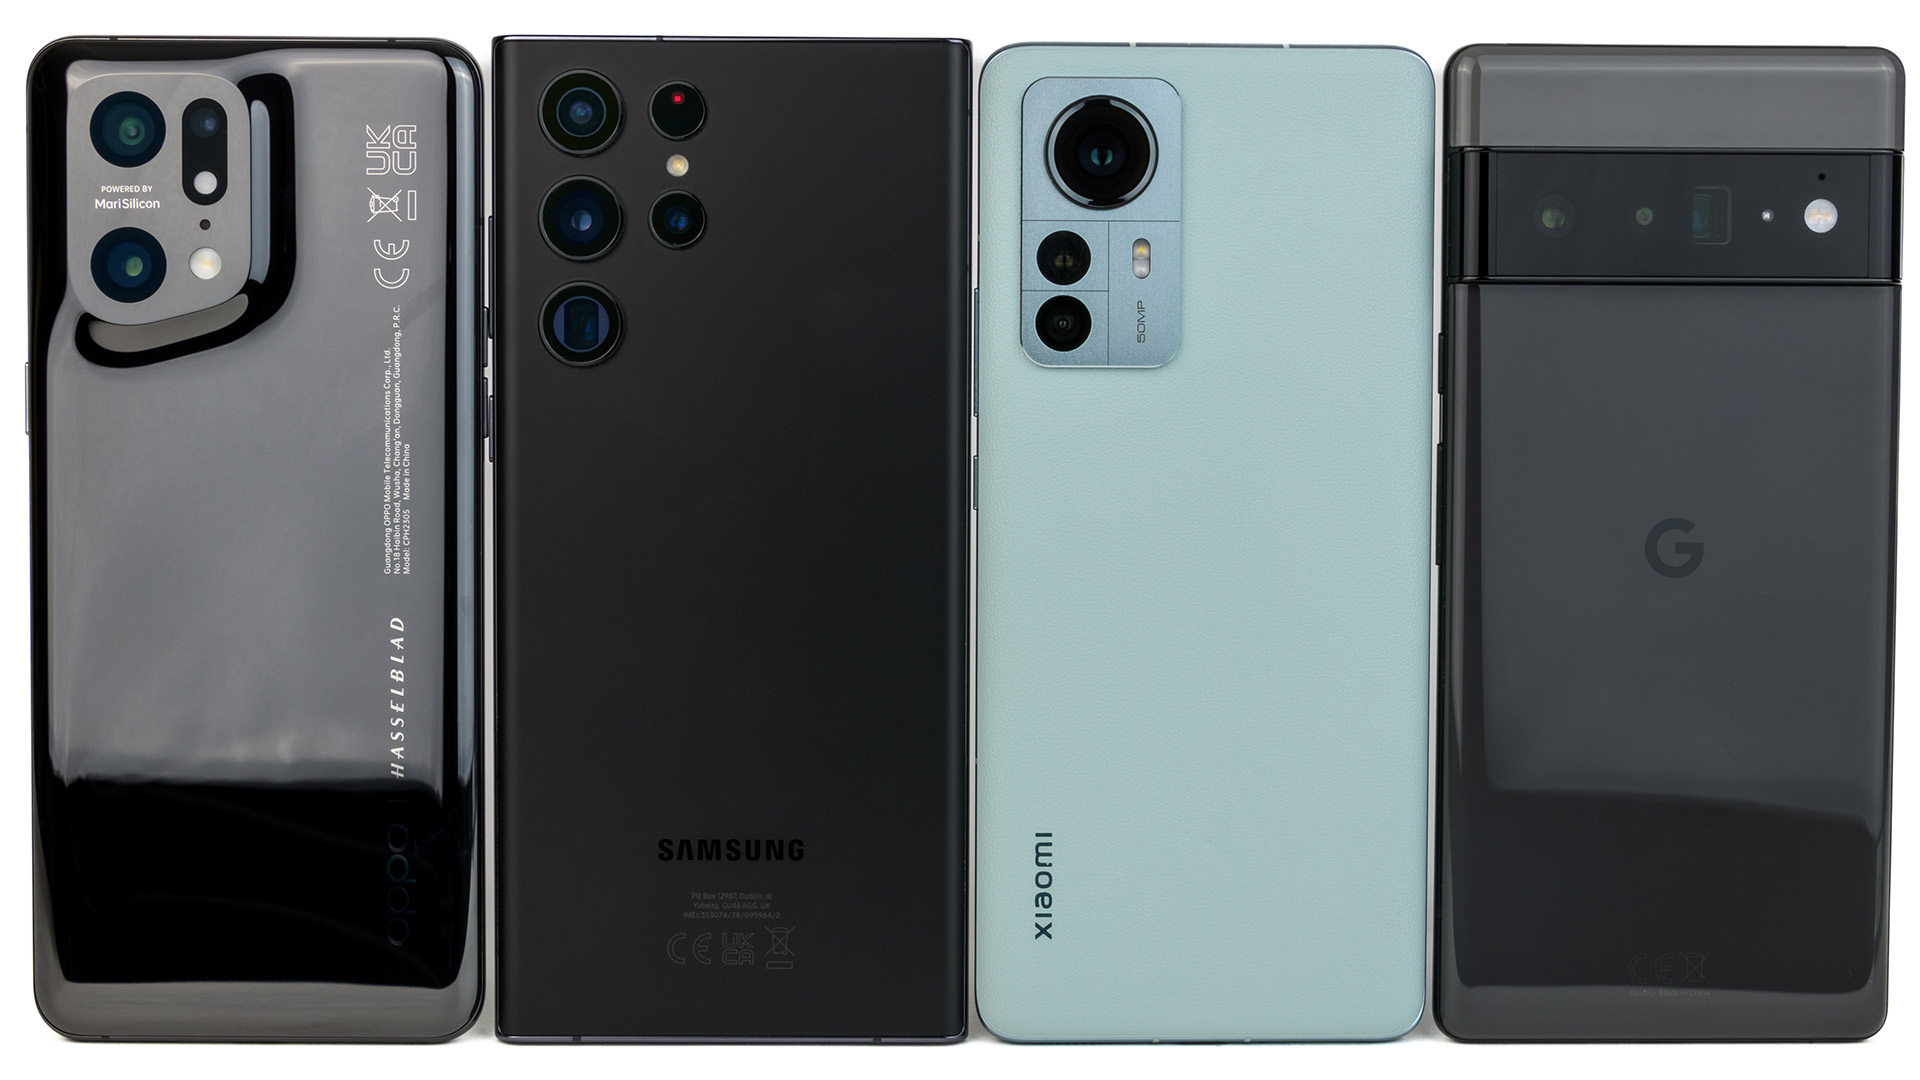 Camera These Android smartphones take the pictures - Reviews